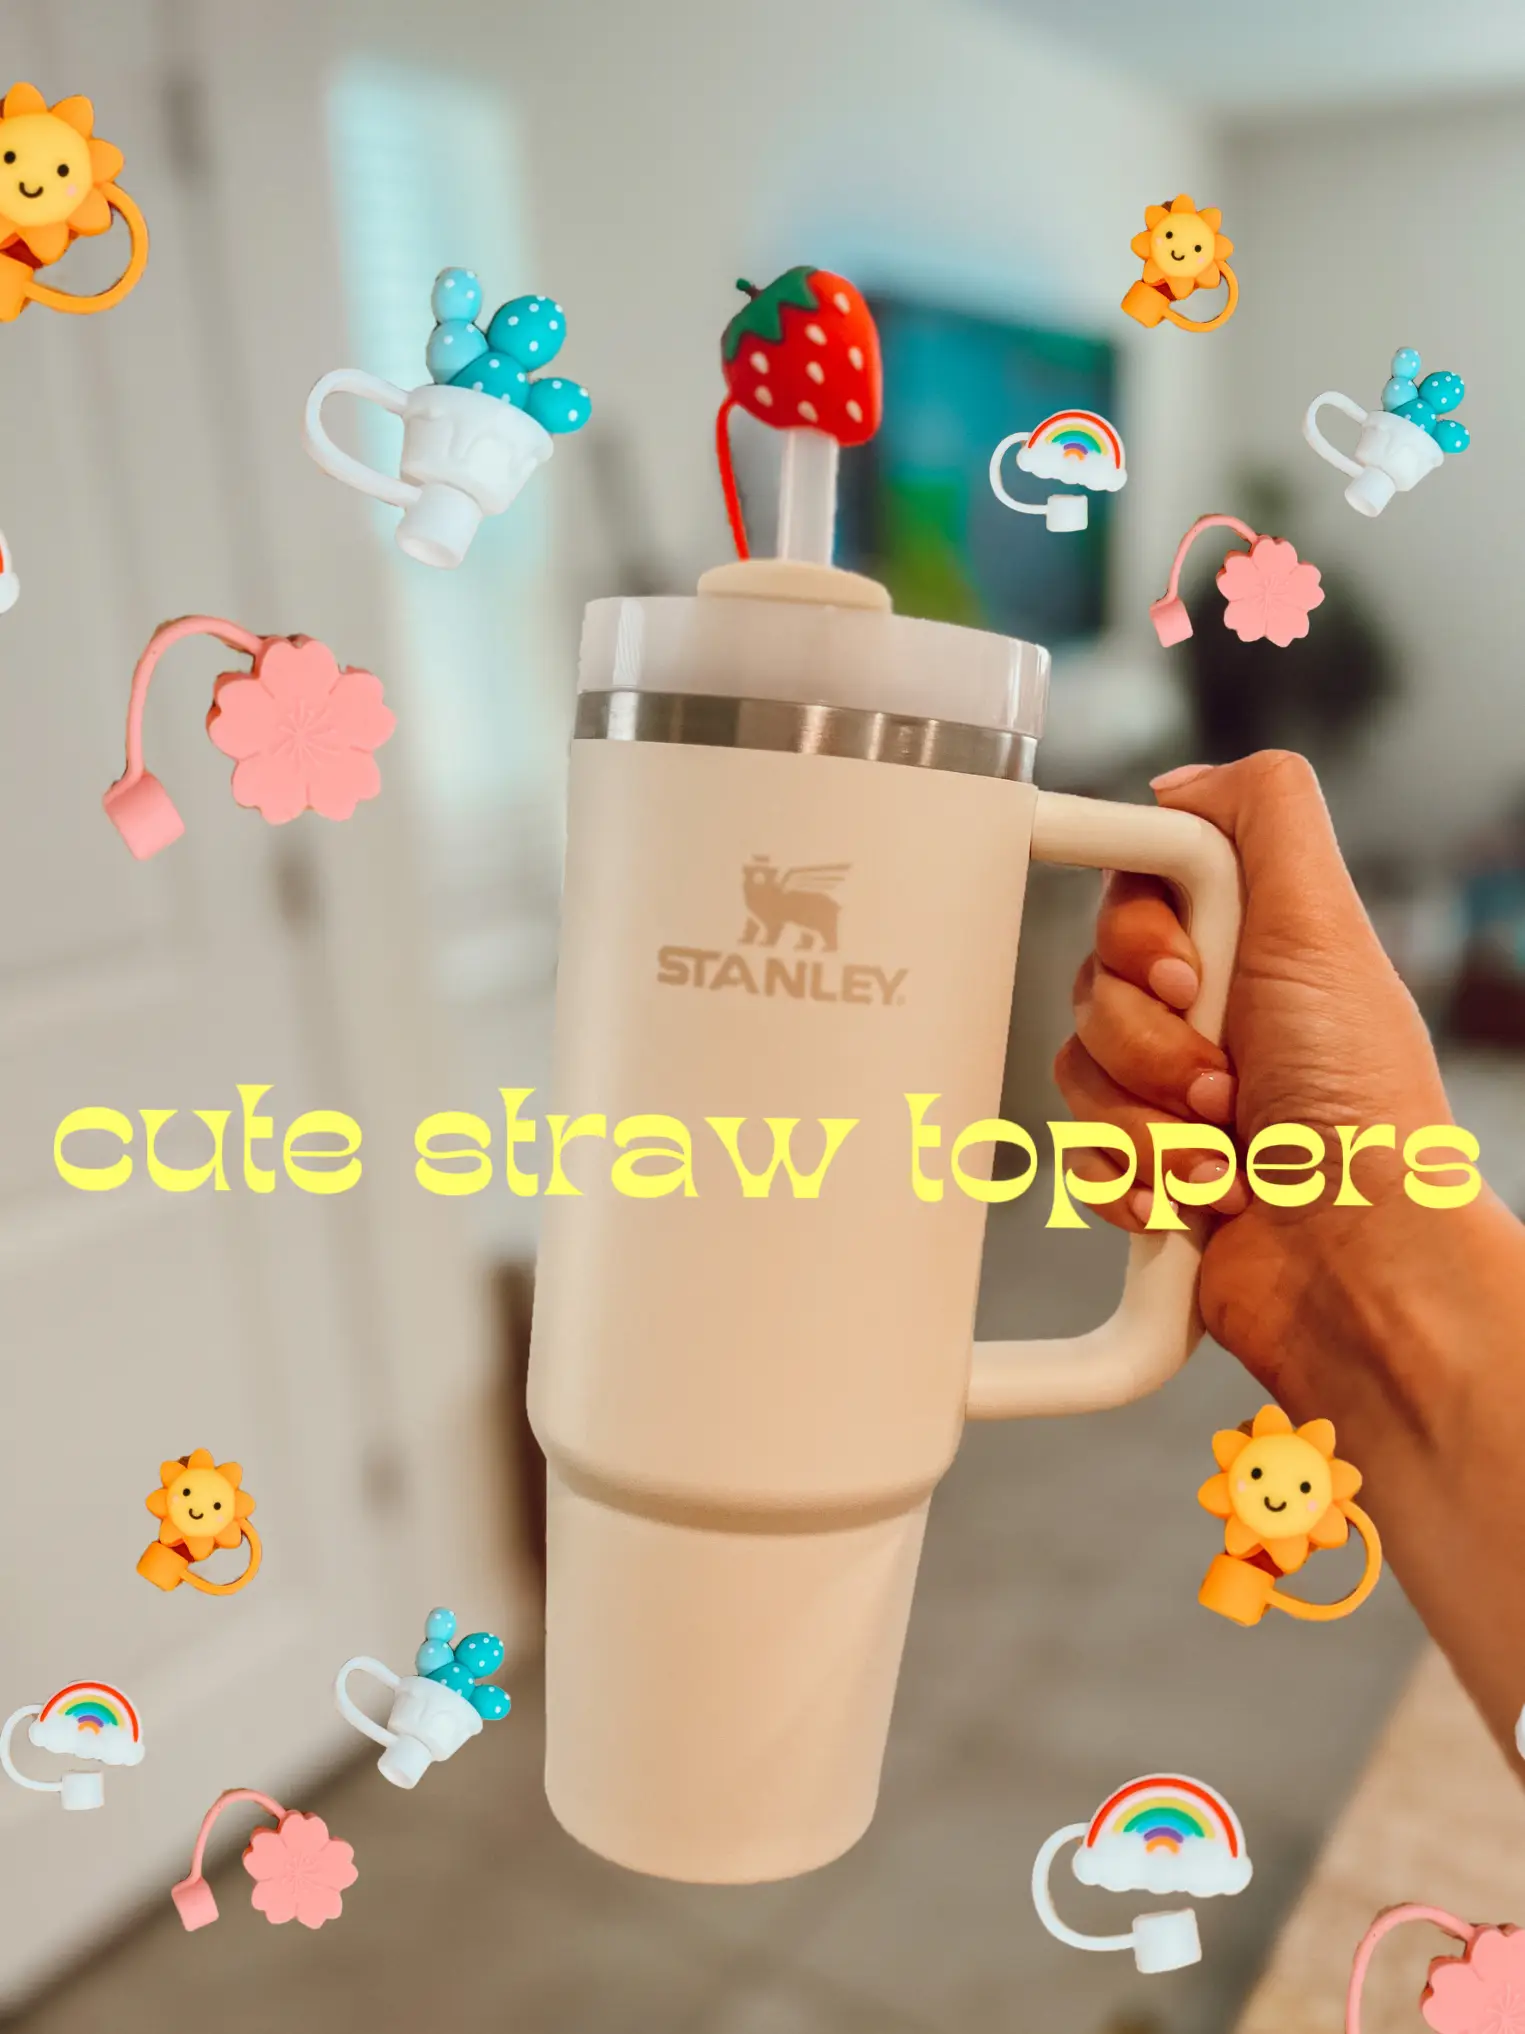 the cutest straw toppers 🤩, Gallery posted by kayla howes